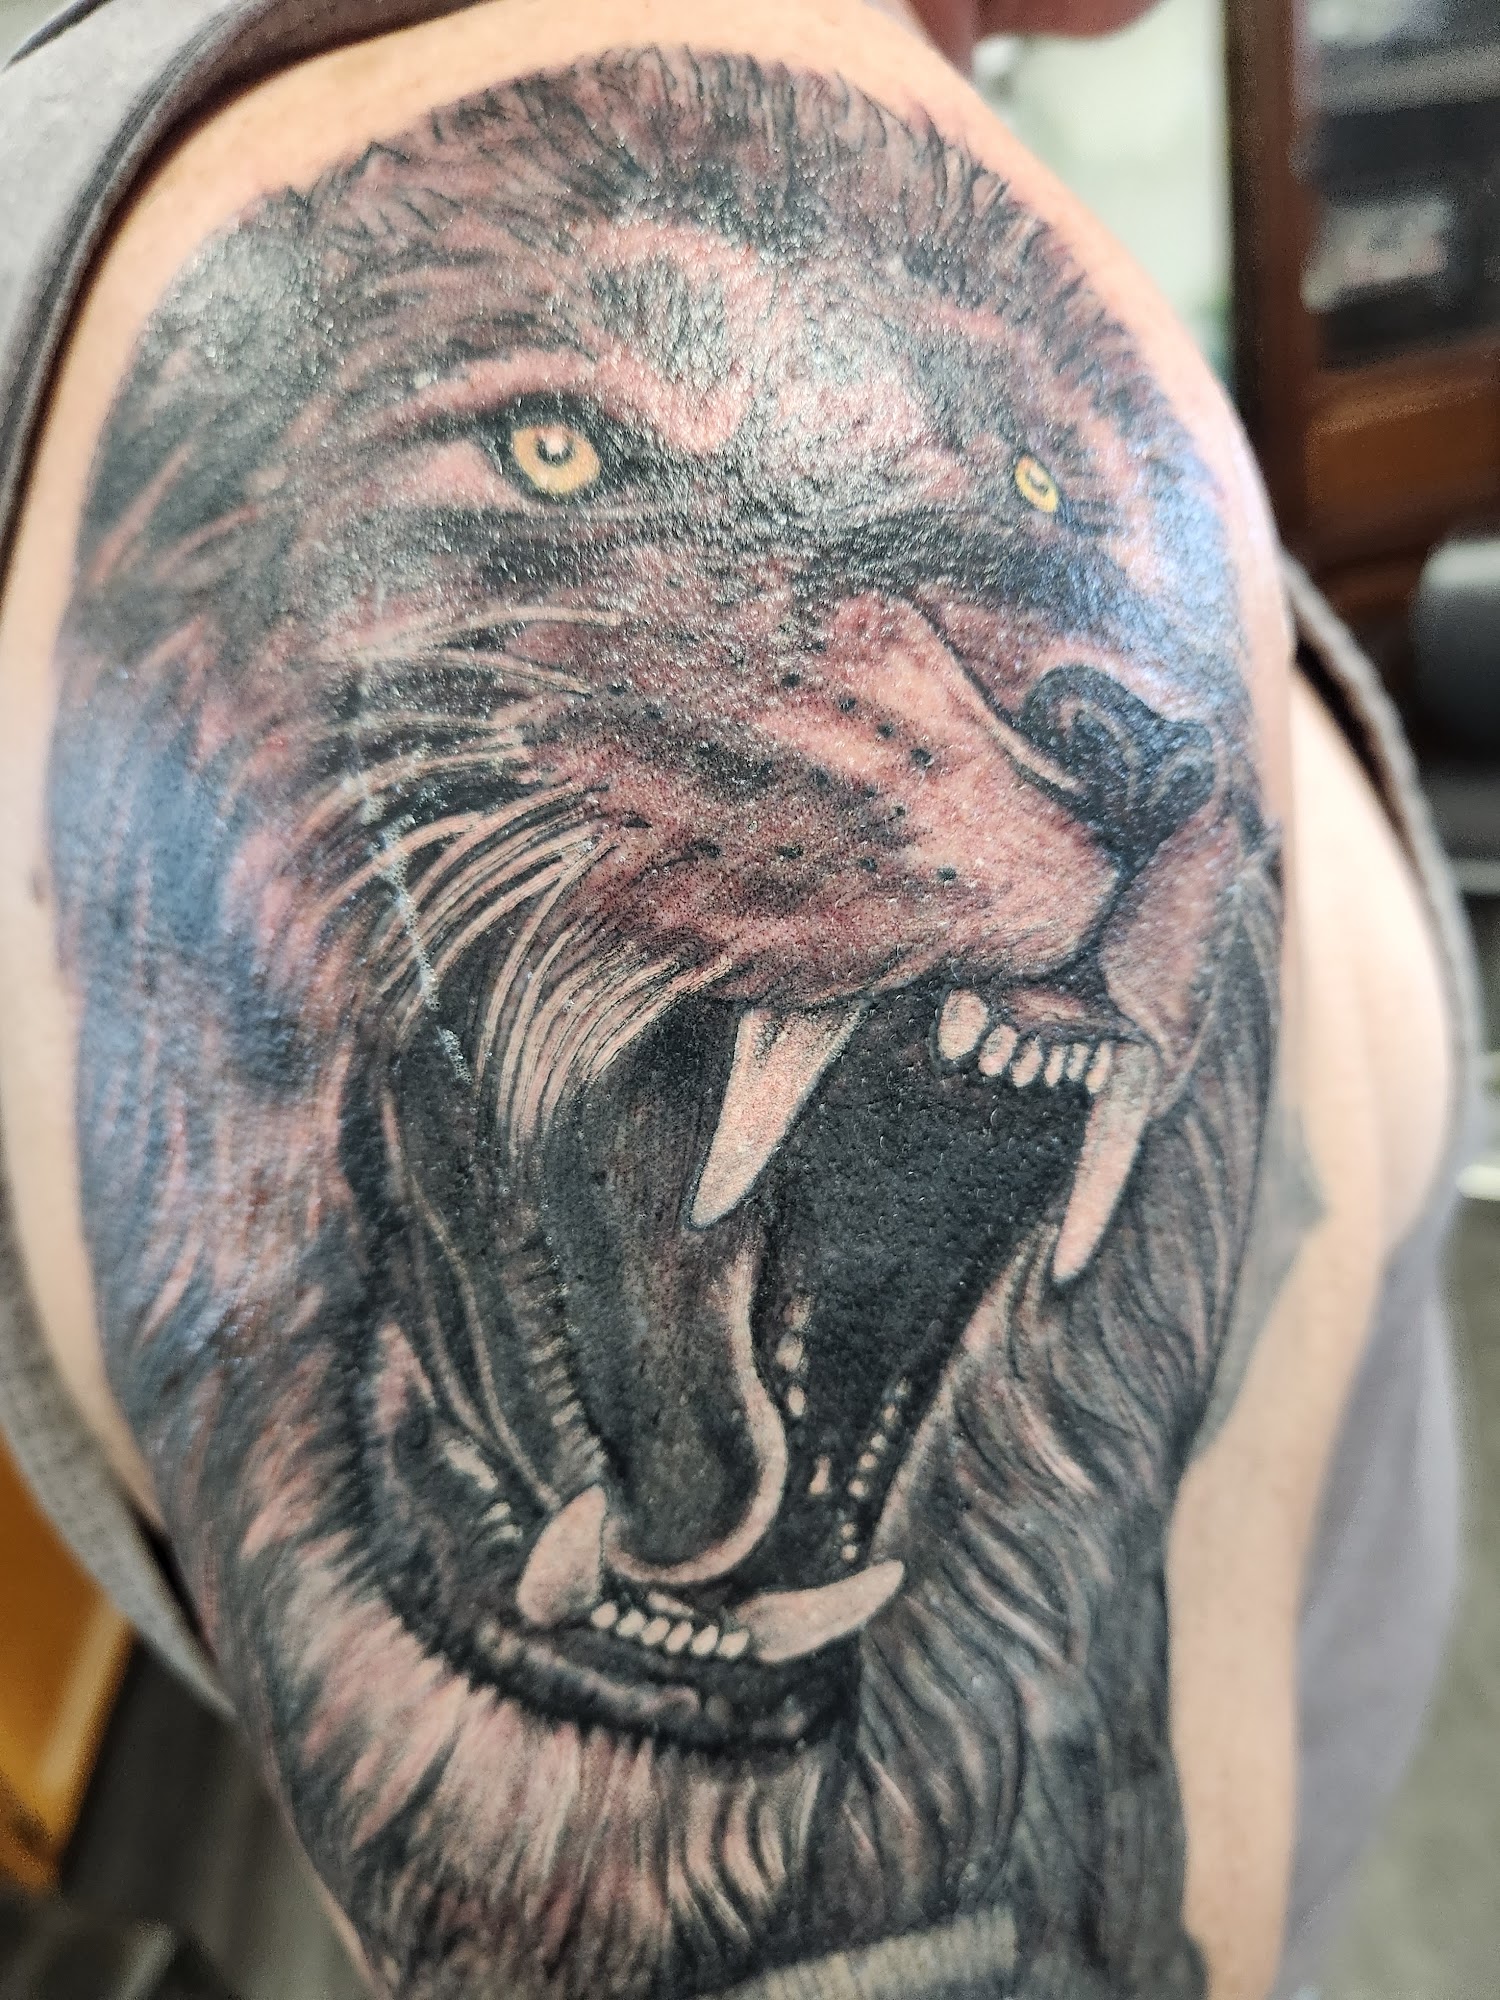 Detail and Color Tattoo 137 Crawford Rd, Pittsfield Maine 04967